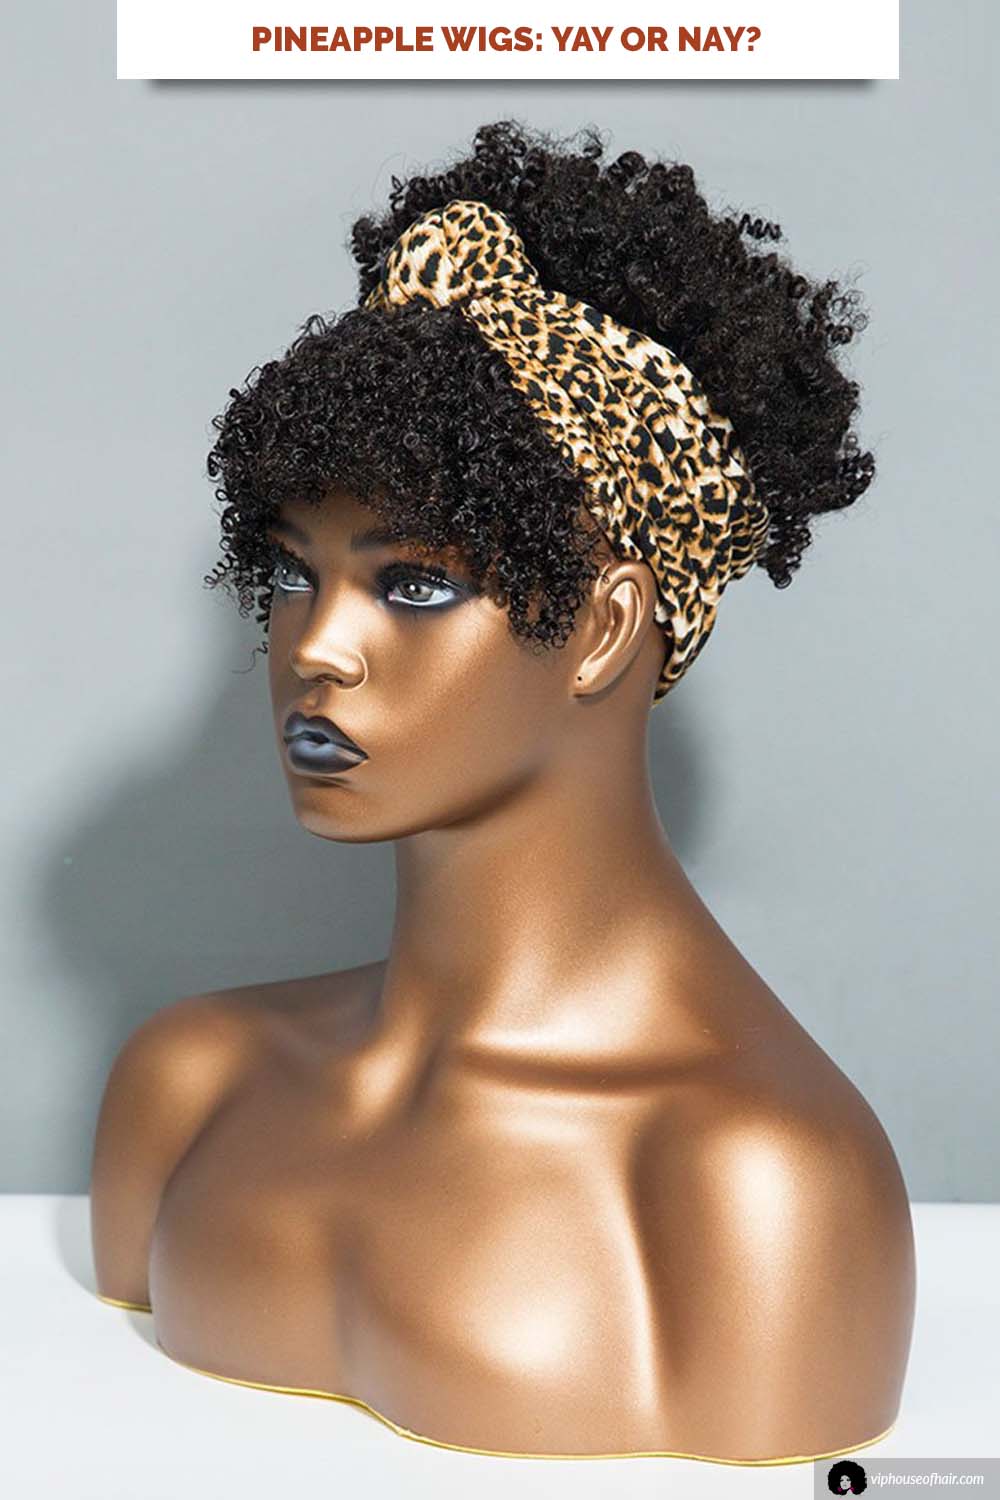 Pineapple Wigs: Yay or Nay?